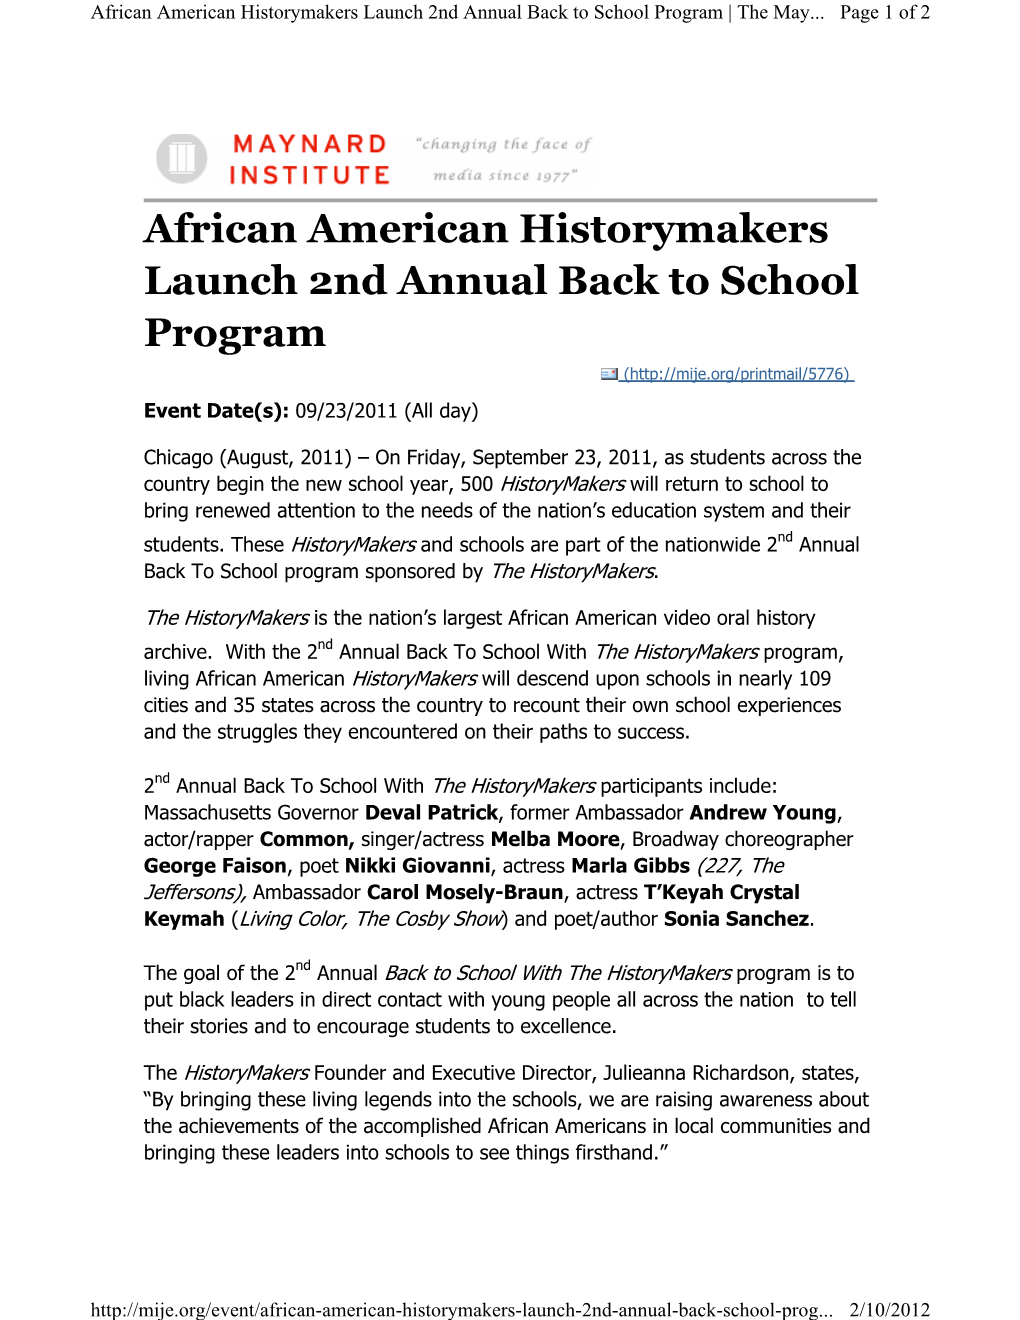 African American Historymakers Launch 2Nd Annual Back to School Program | the May